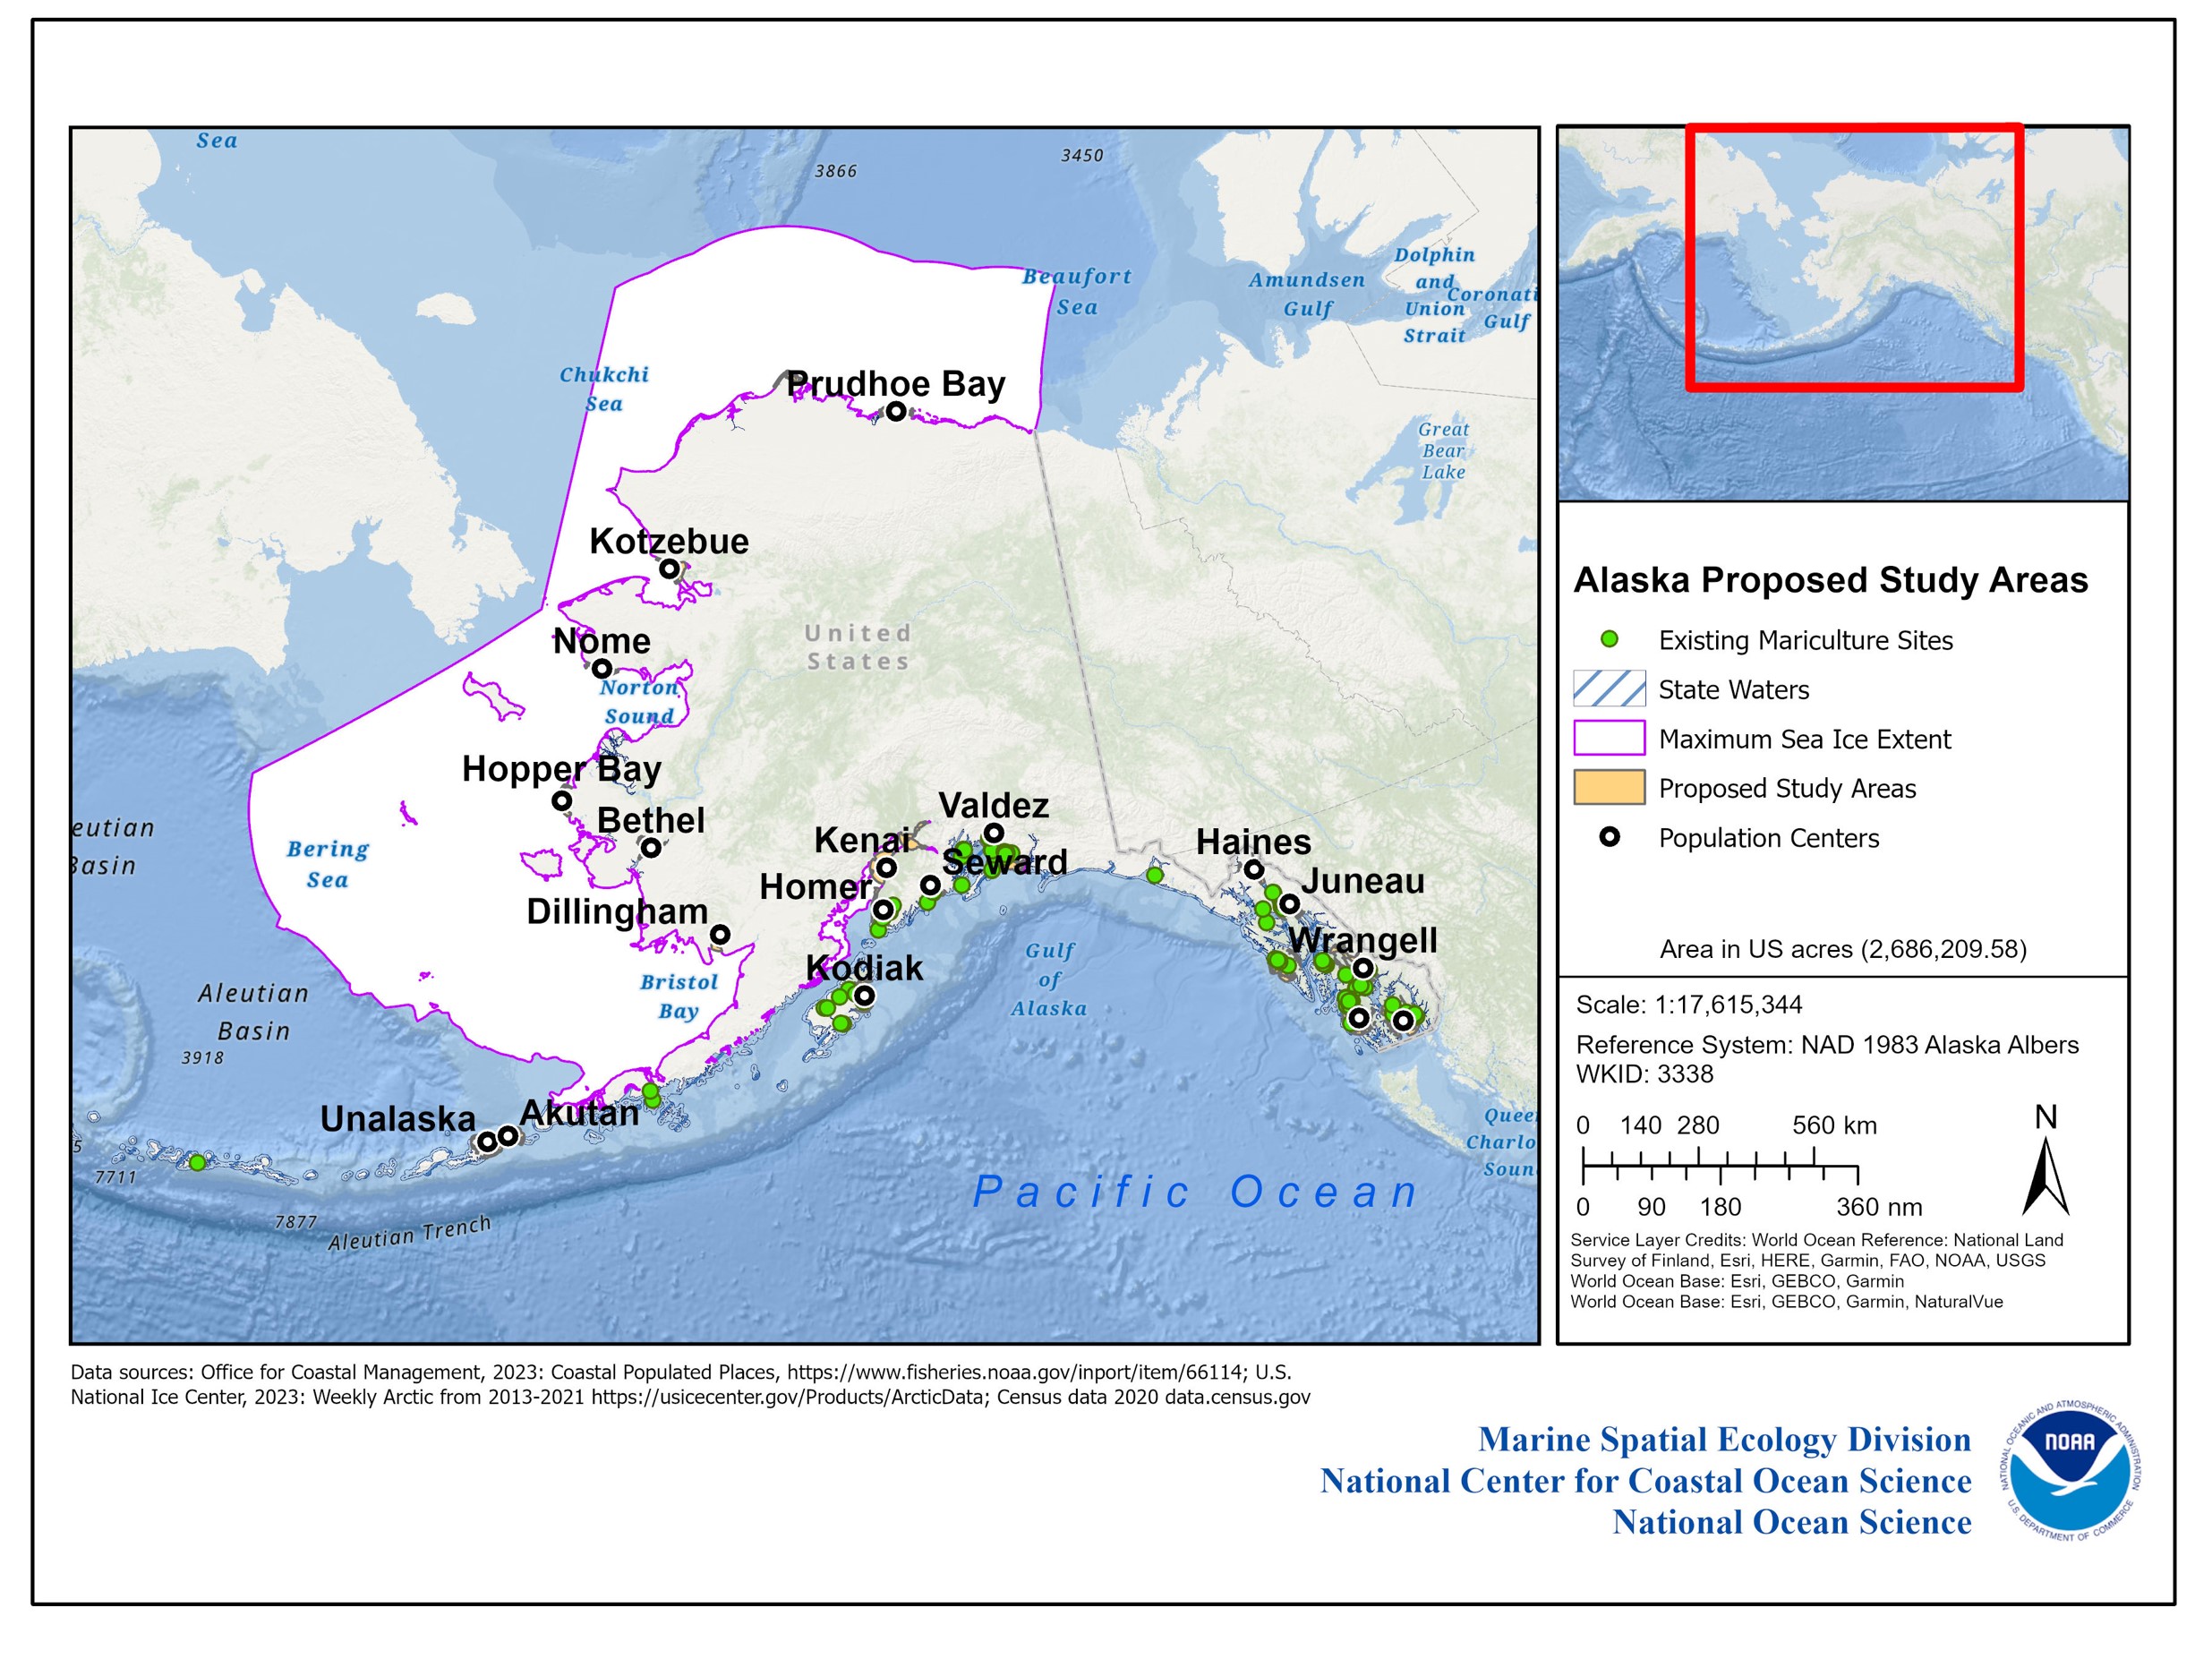 Map of Alaska showing proposed study areas.